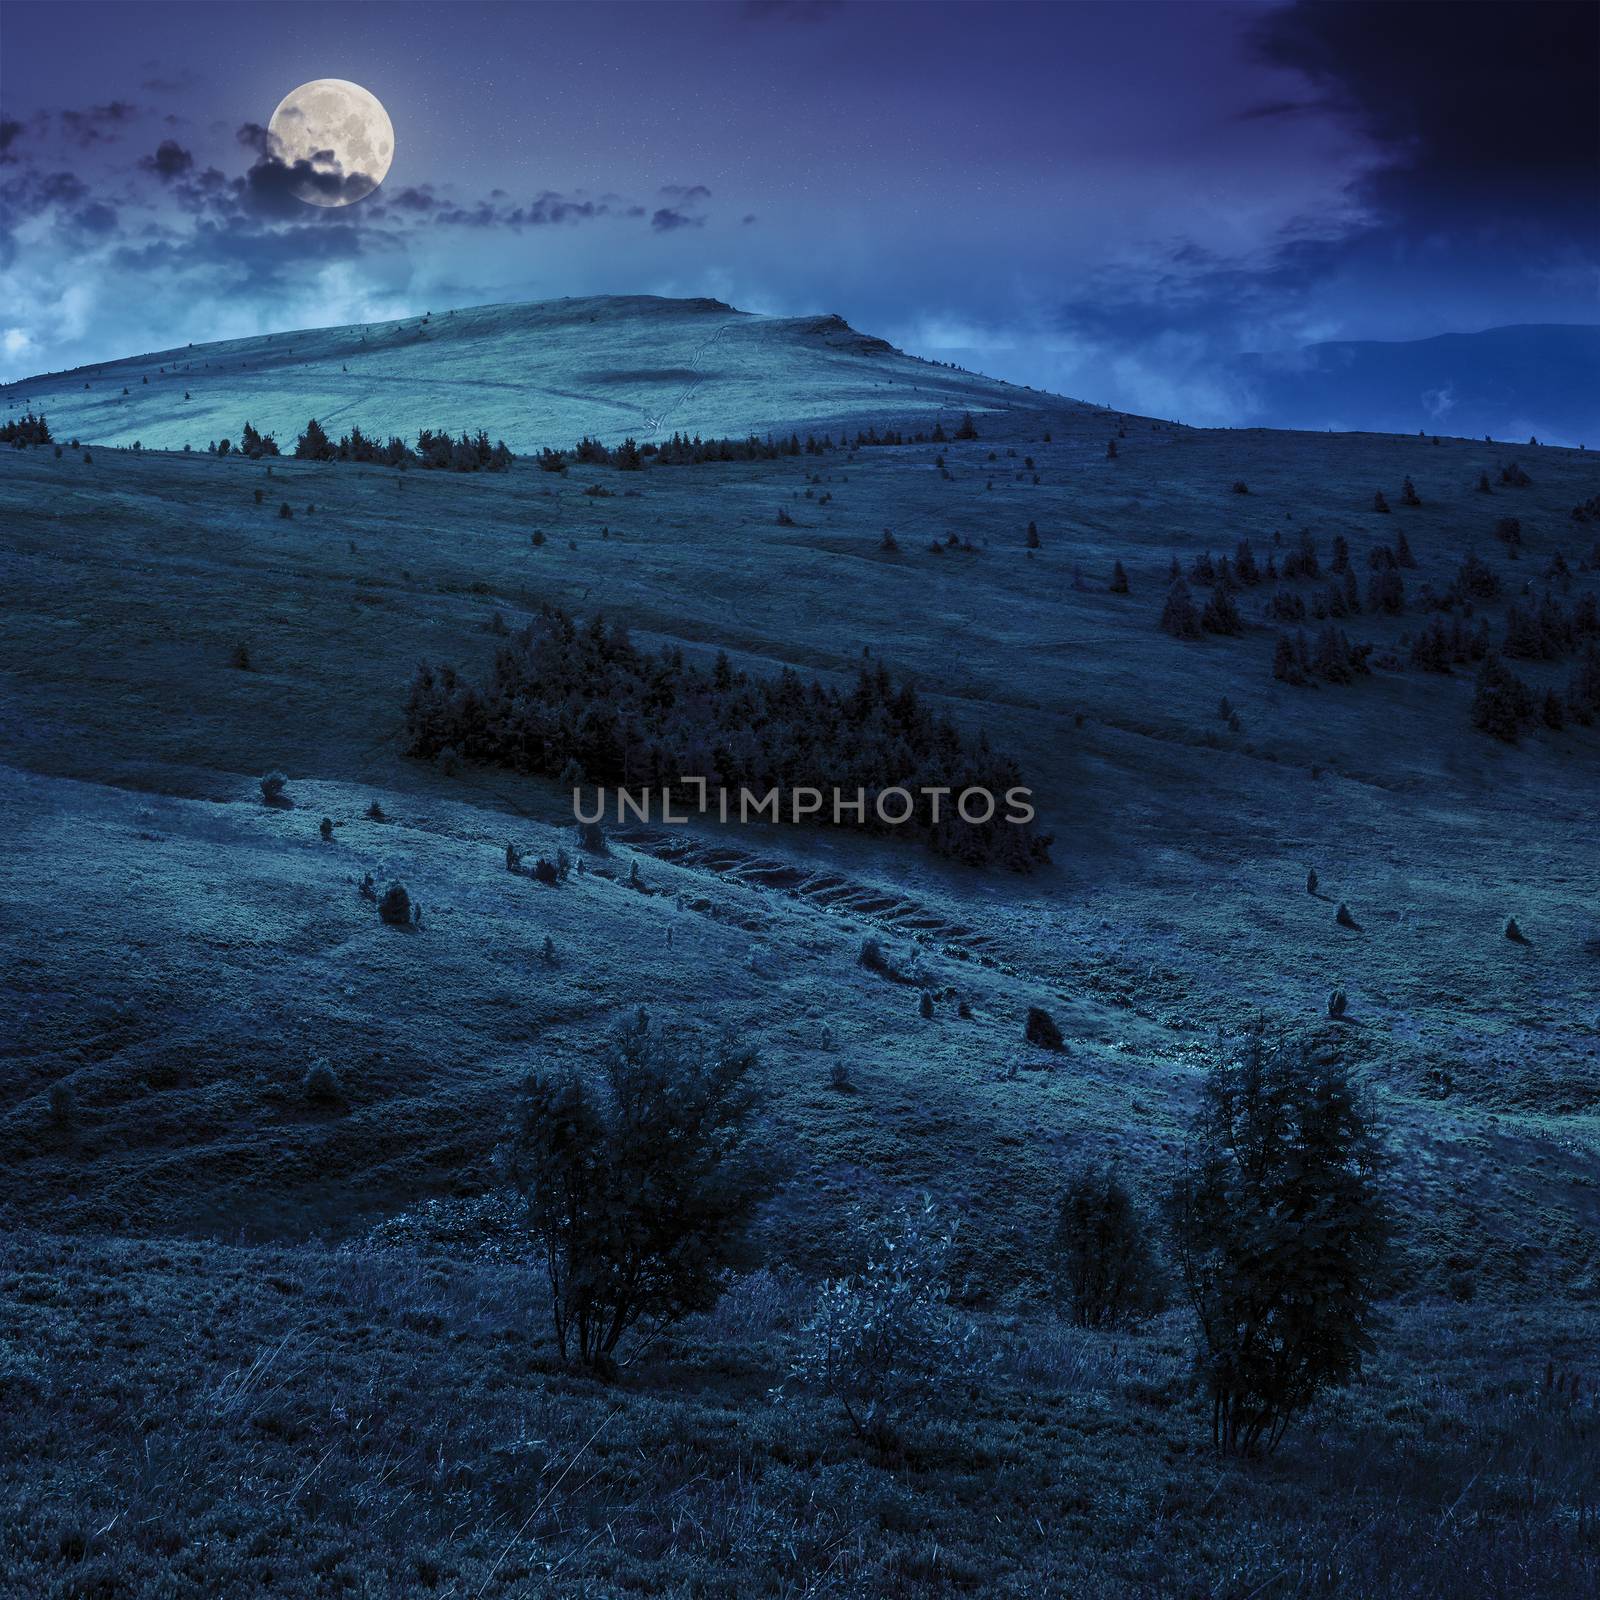 two trees in front of mountain hillside with coniferous forest and high peak under cloudy sky at night in full moon light